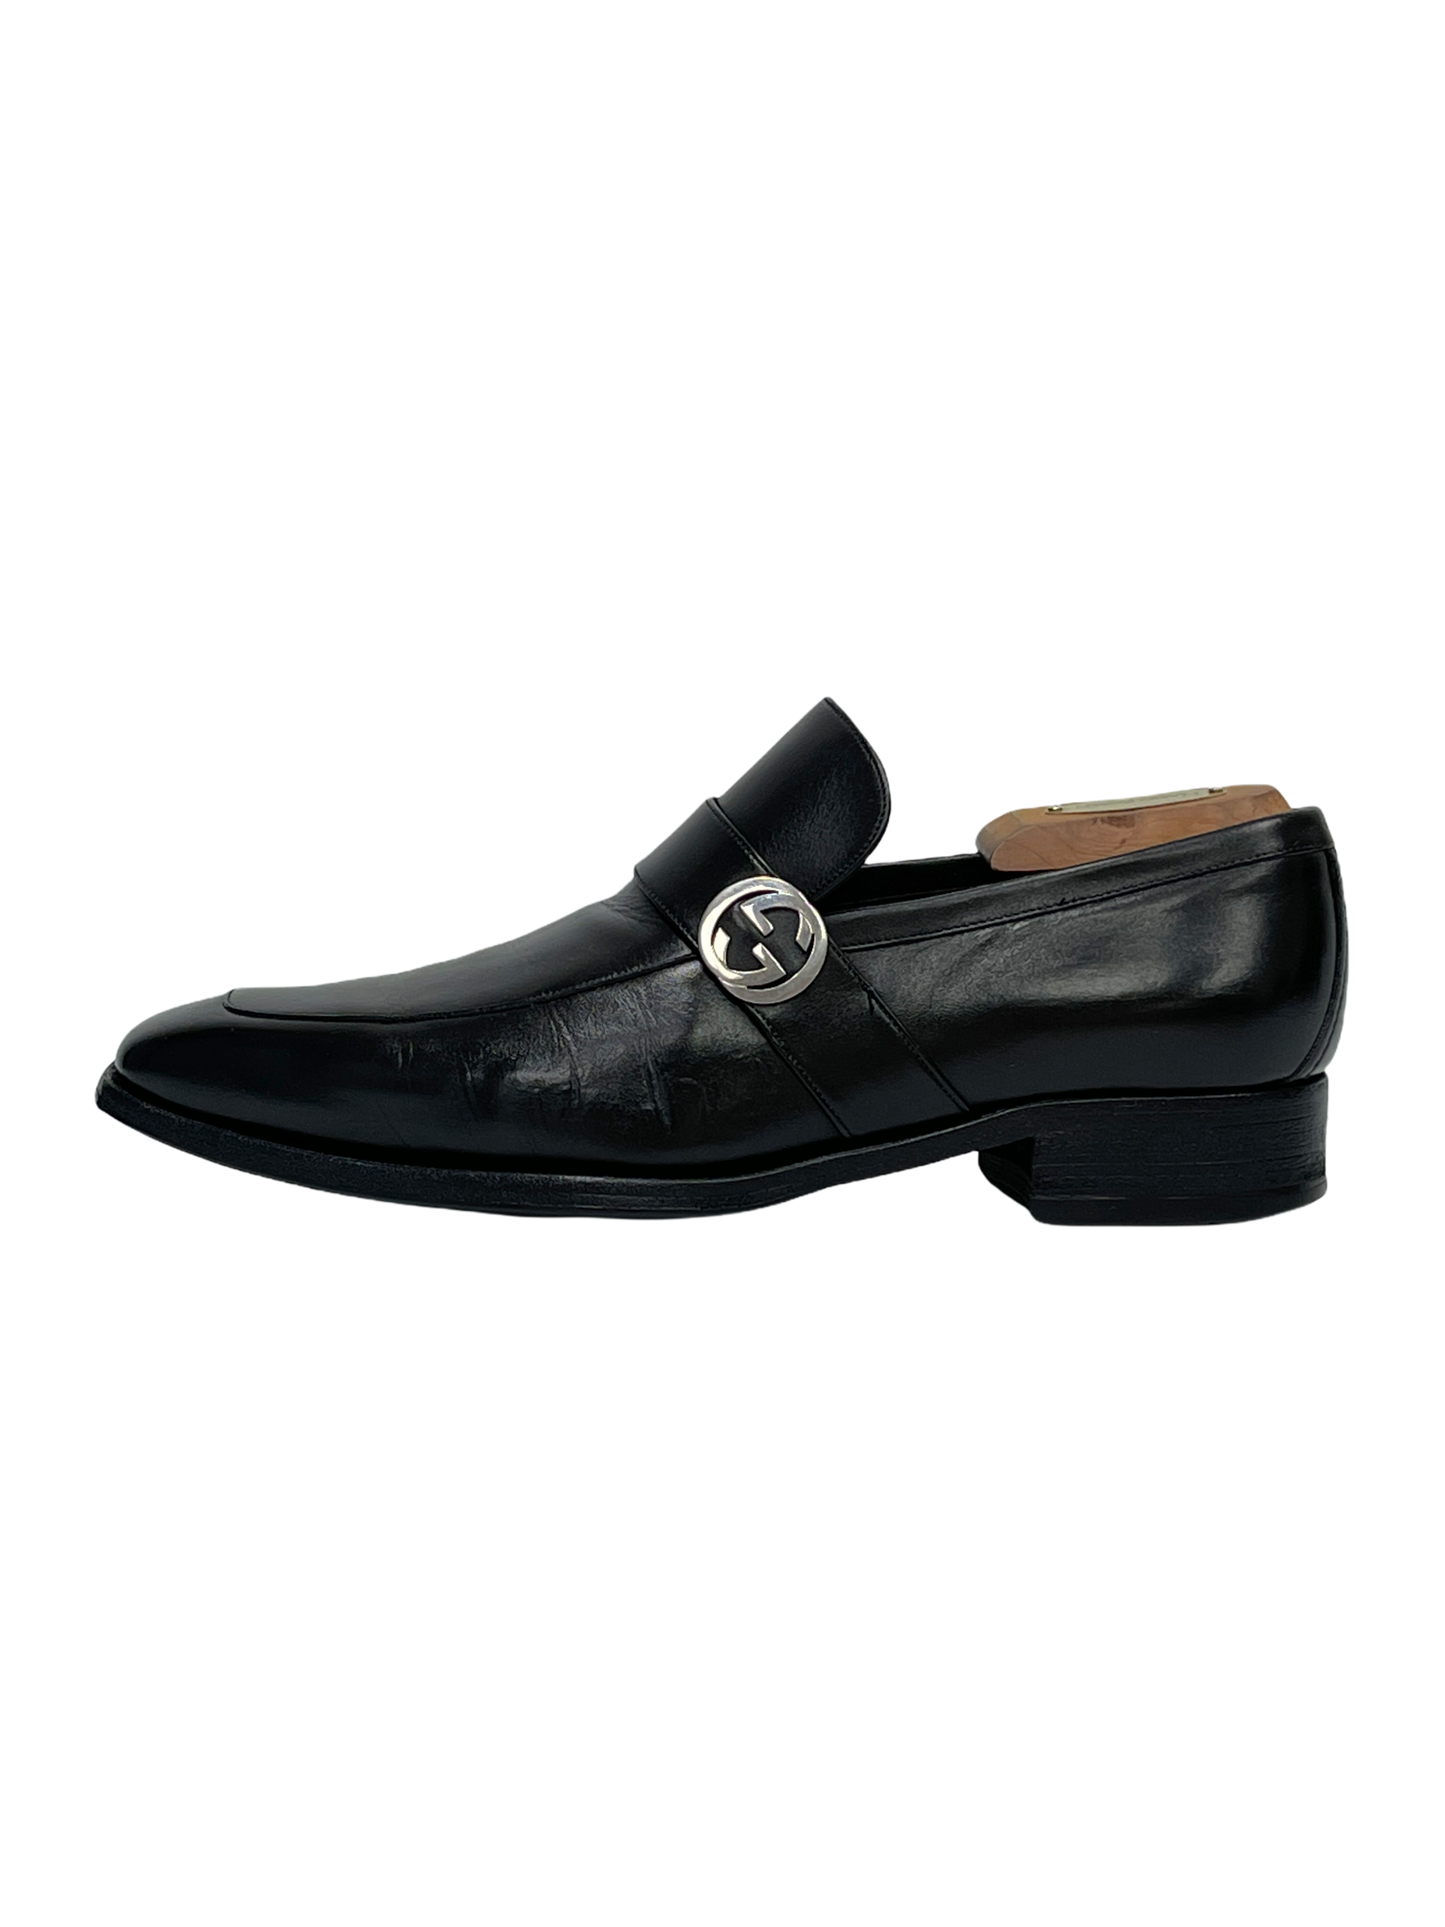 GUCCI Black GG Buckle Penny Loafers 8 D US